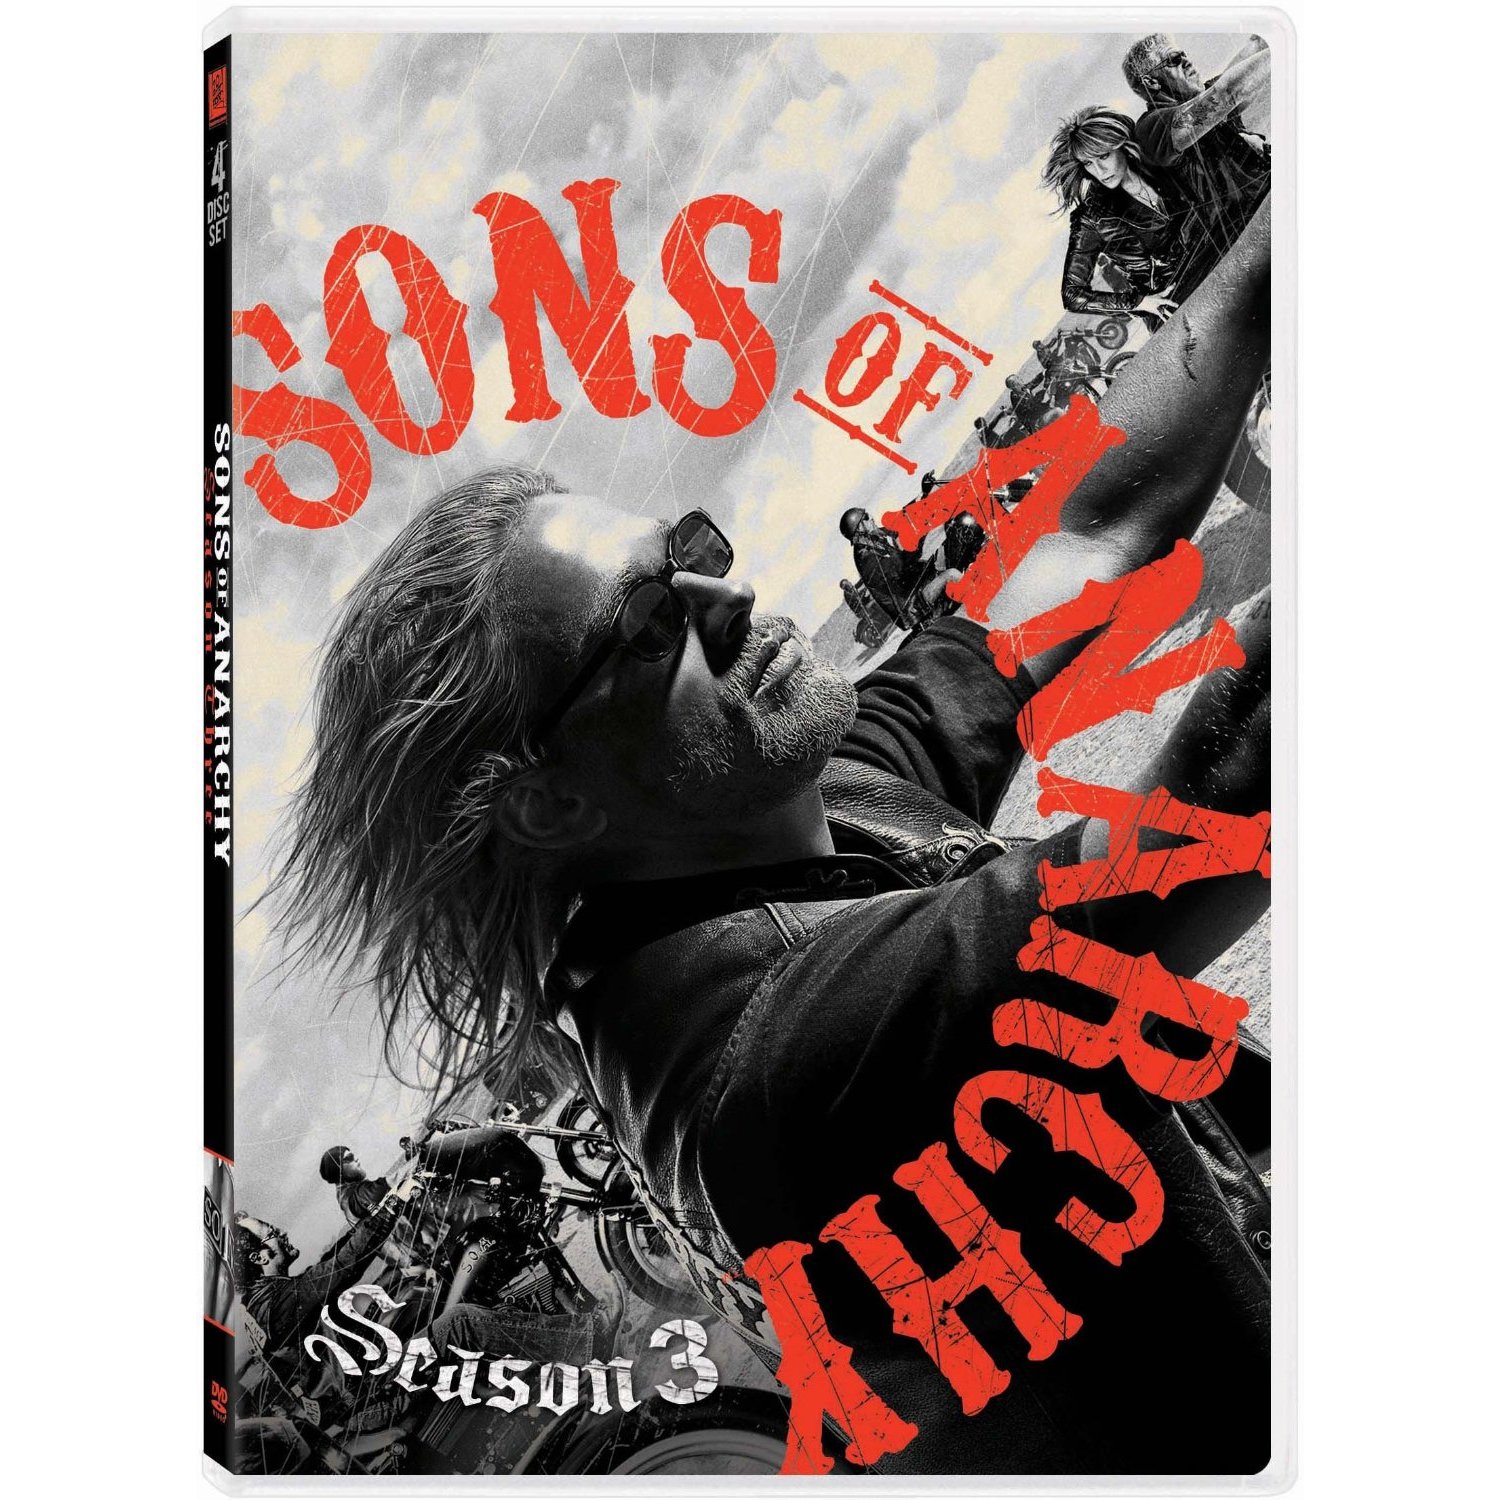 Sons of Anarchy Season 3 Disk 2